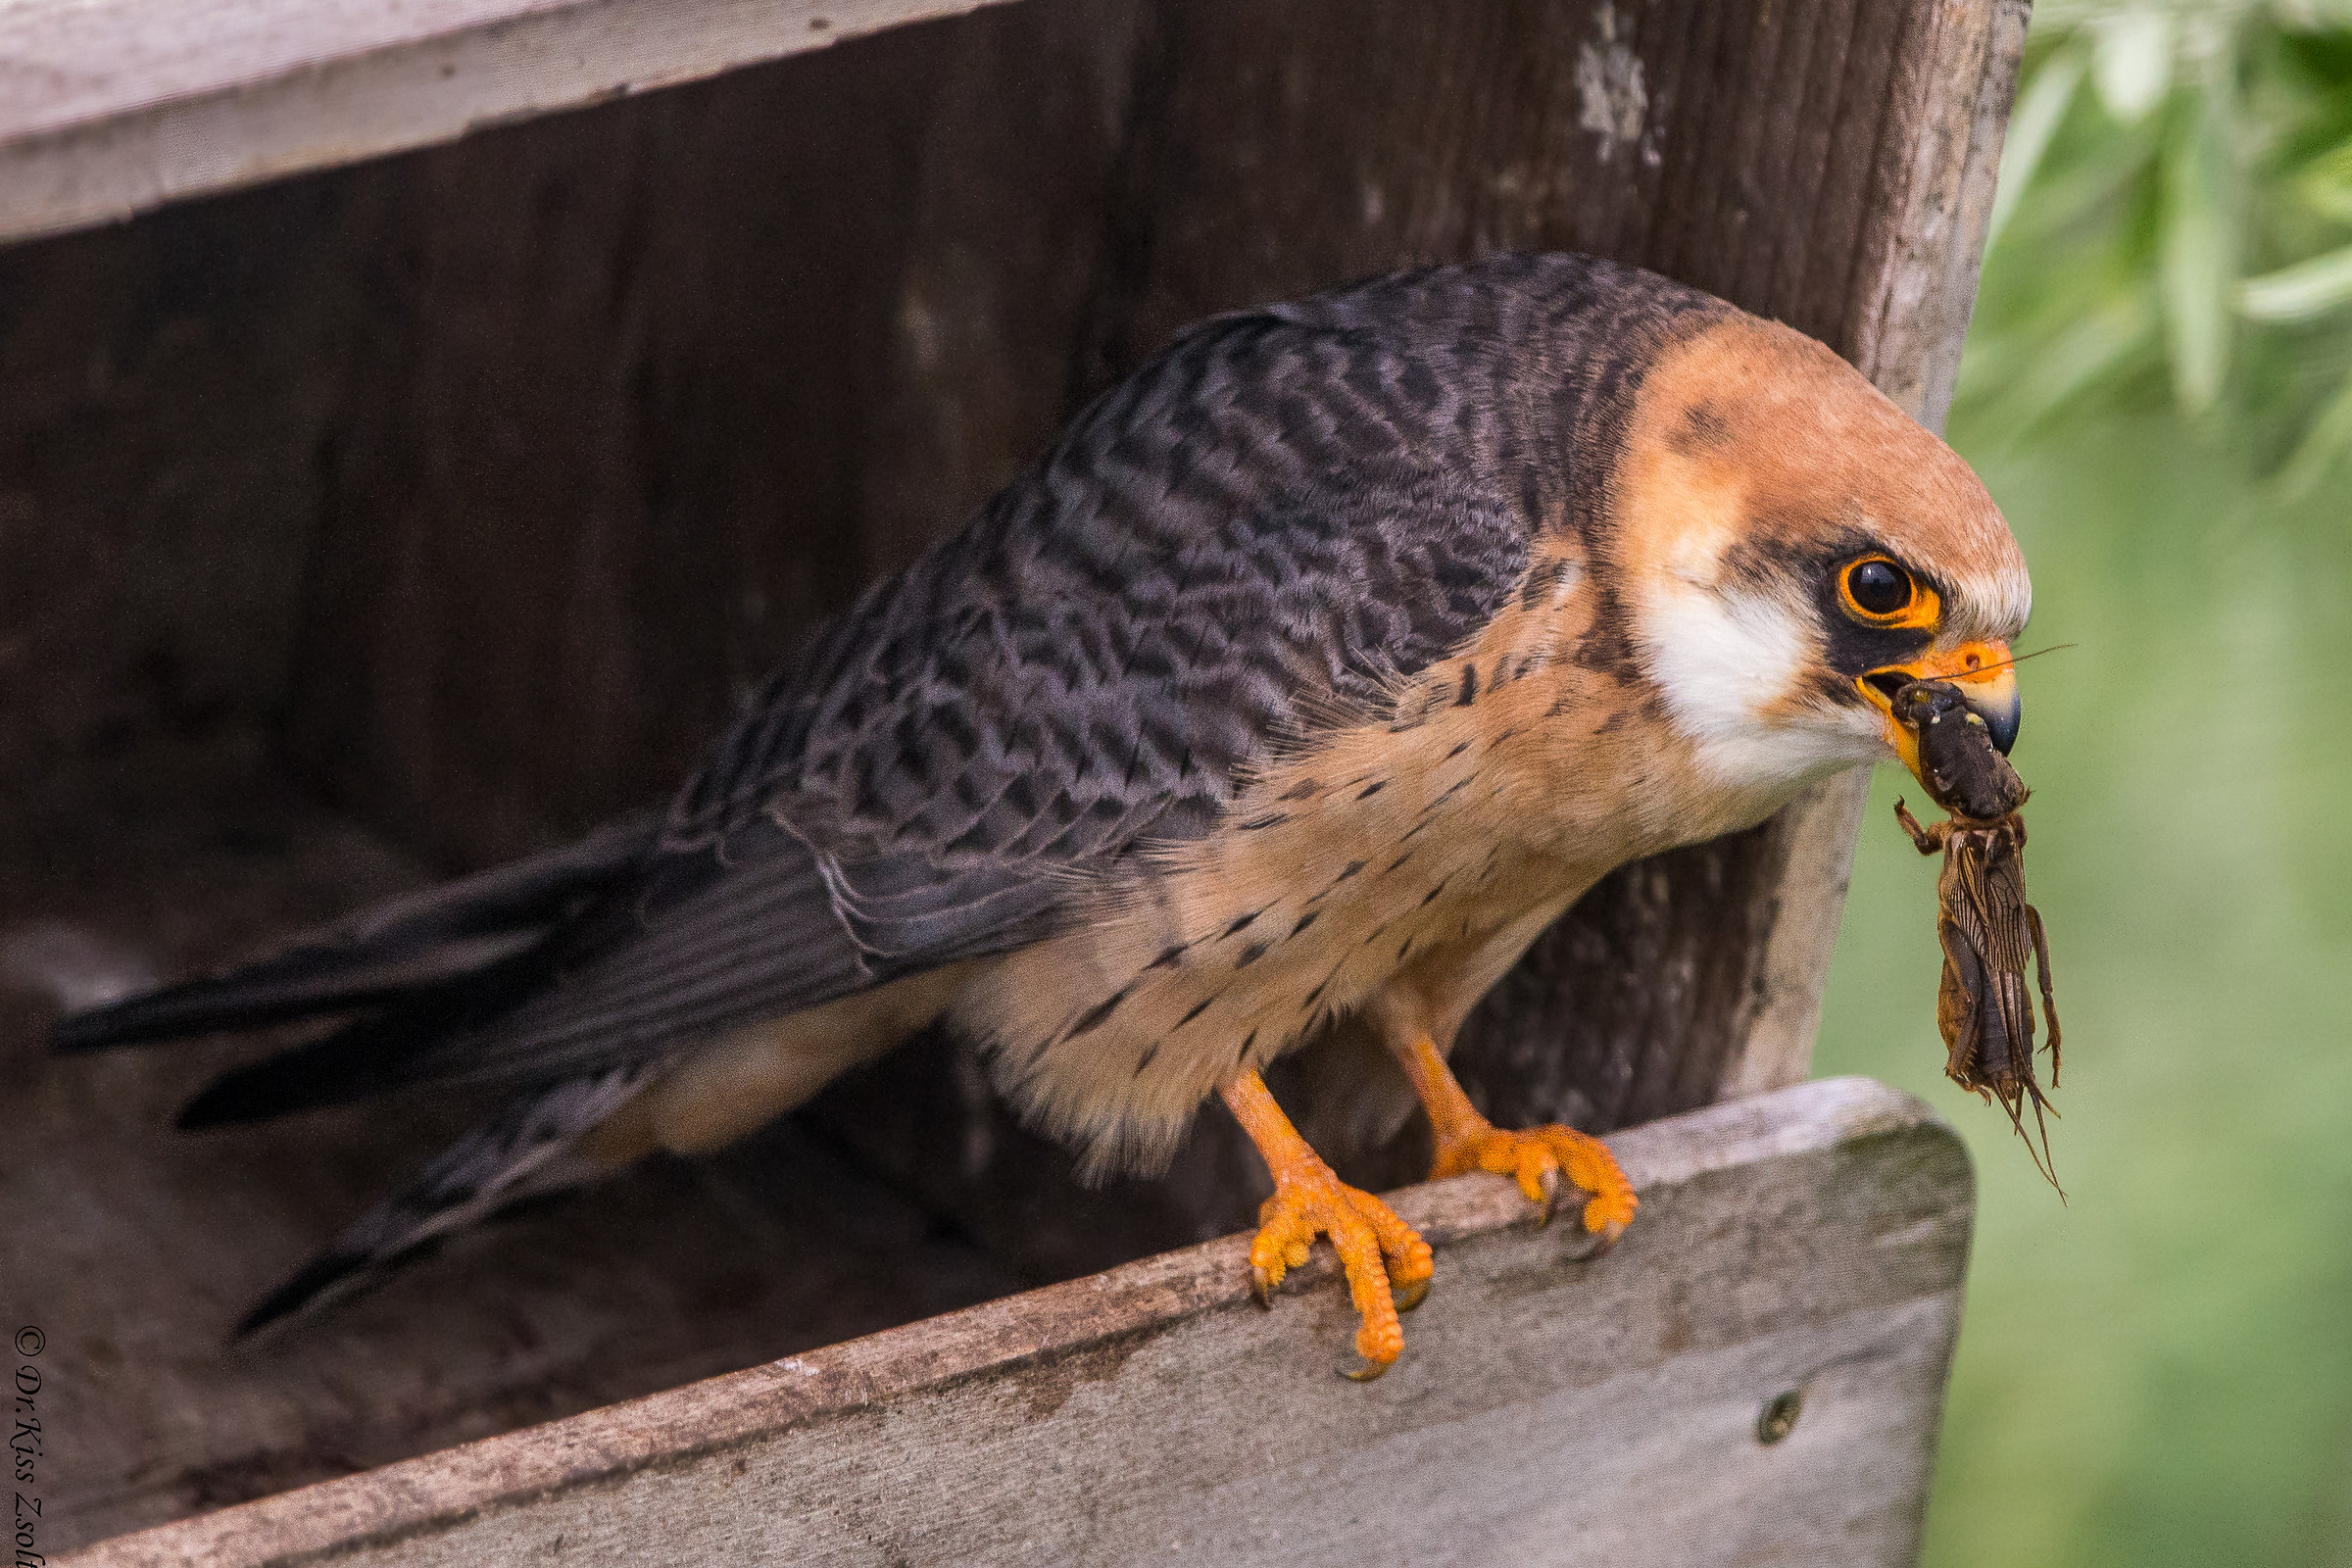 Red-footed falcon catching a cricket...